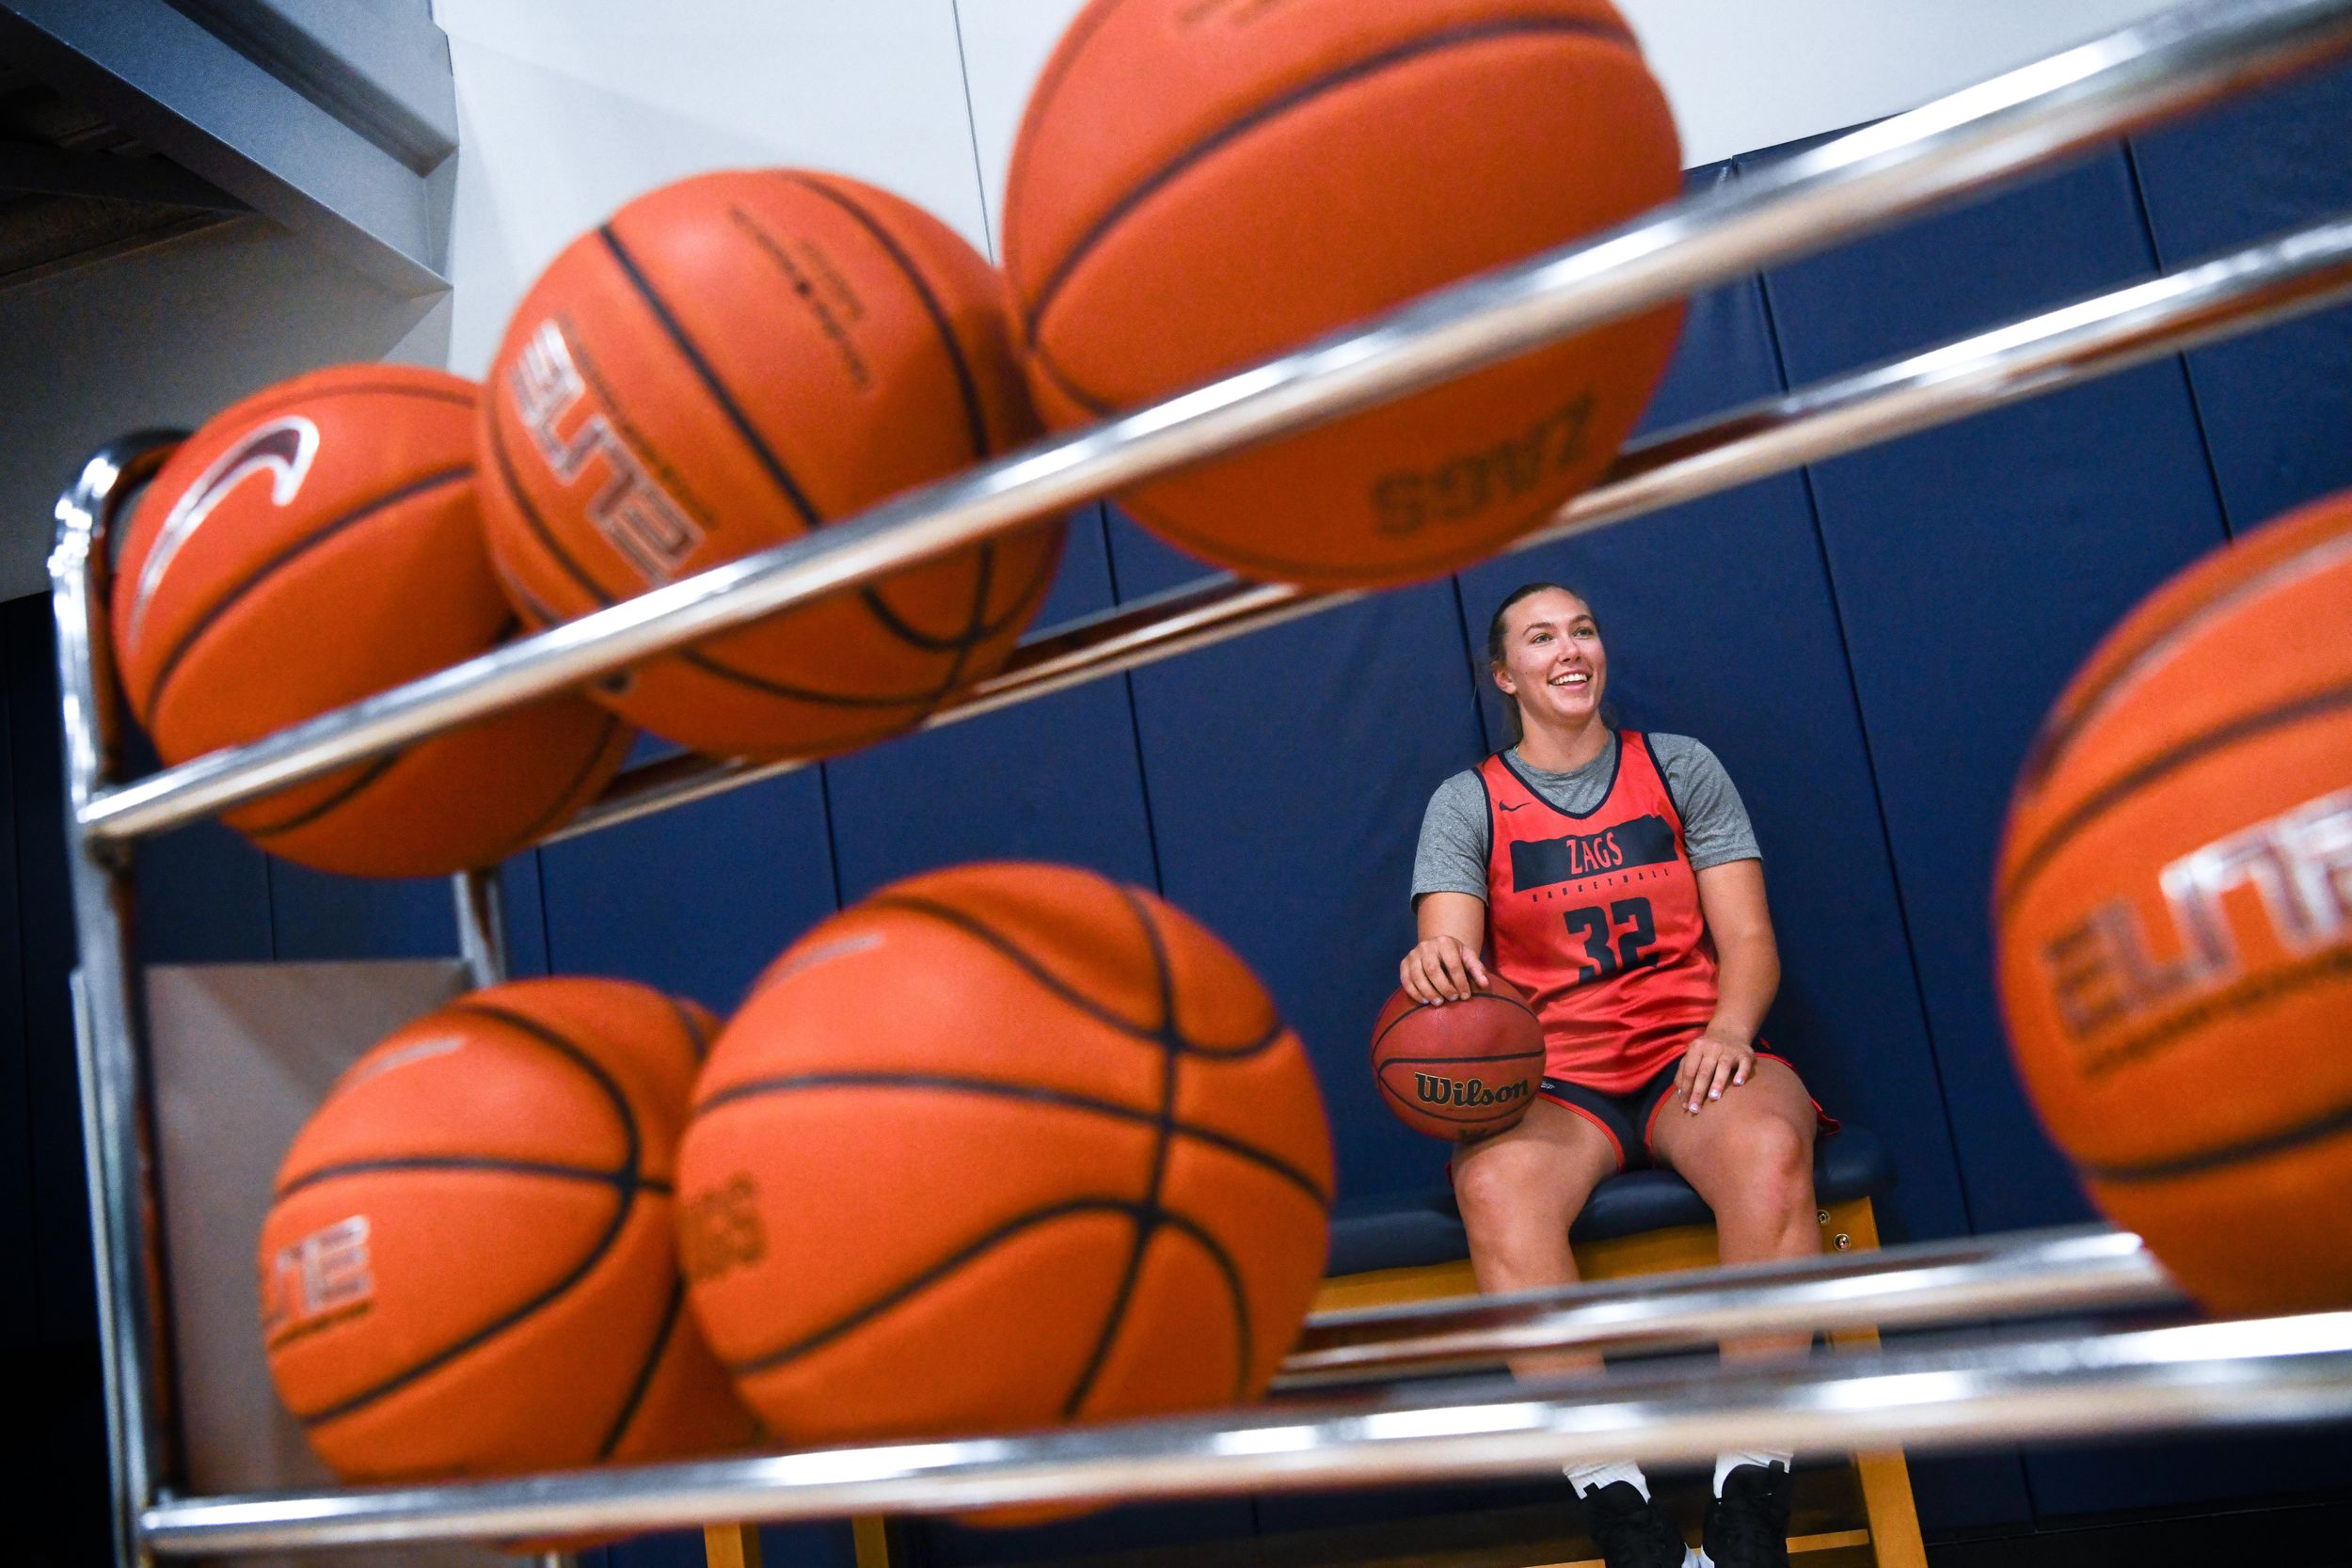 gonzaga-s-jill-townsend-ready-for-return-to-court-after-recovering-from